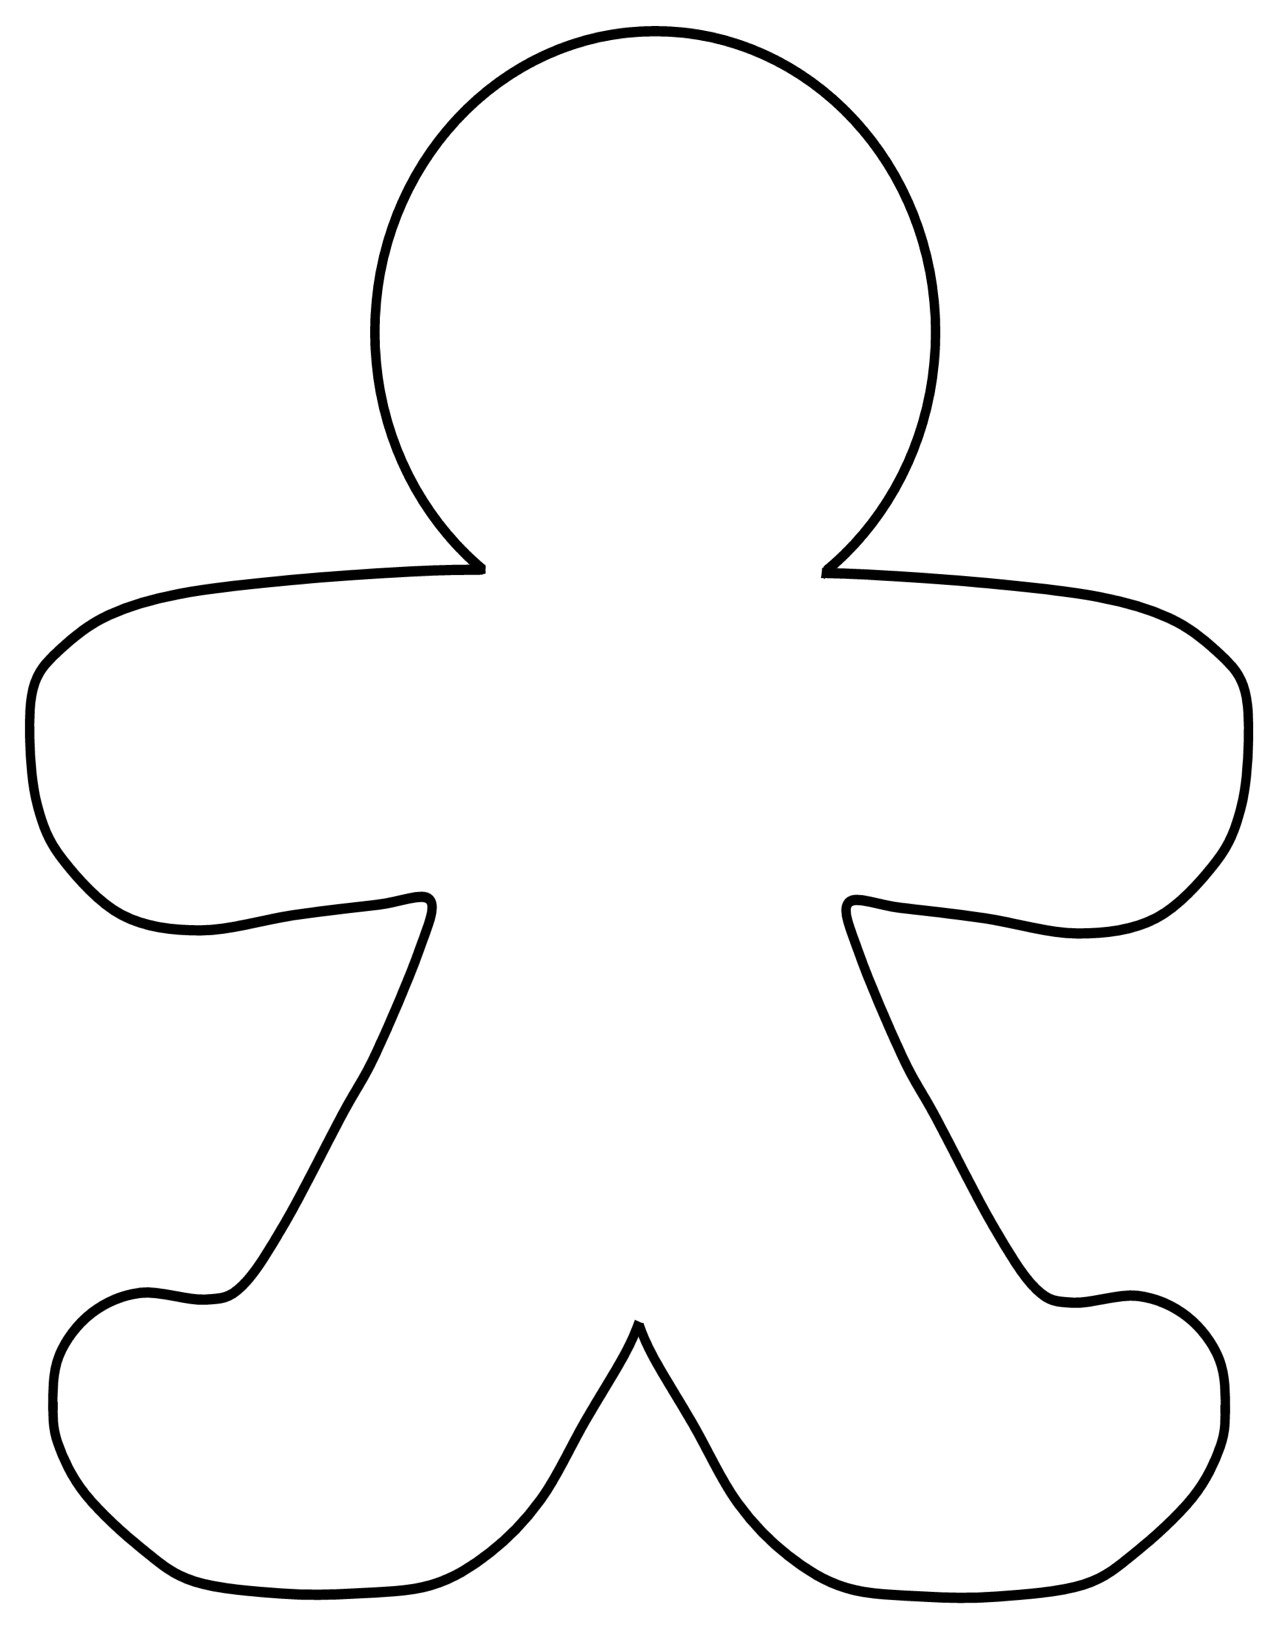 Outline Of A Person Template - ClipArt Best